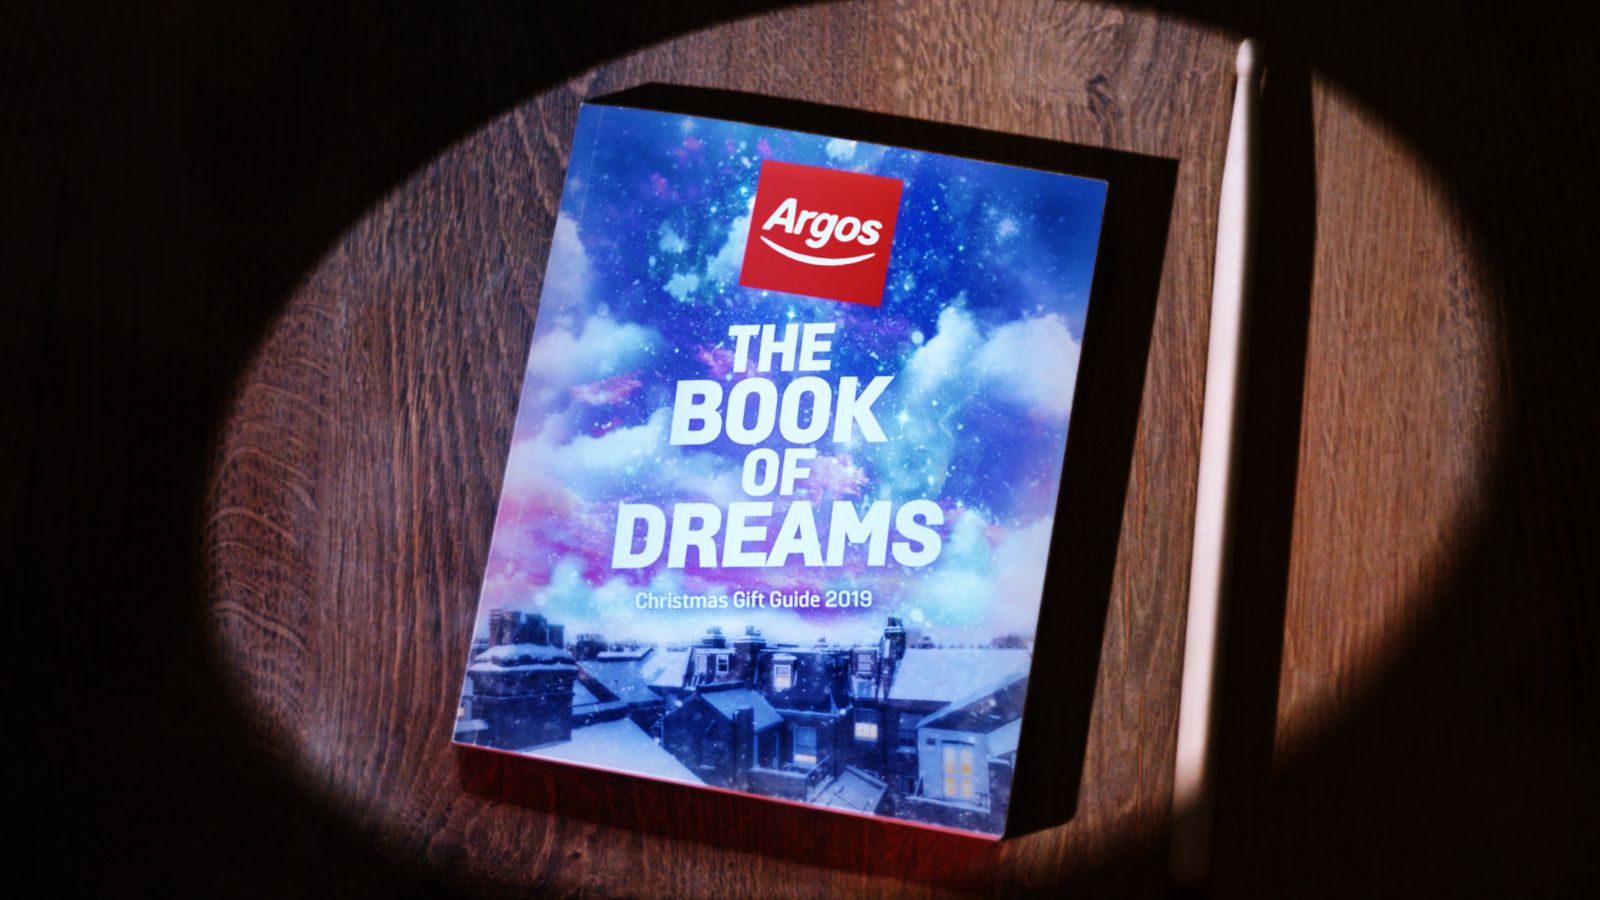 Argos catalogue After 48 years and 1bn copies, time's up for the